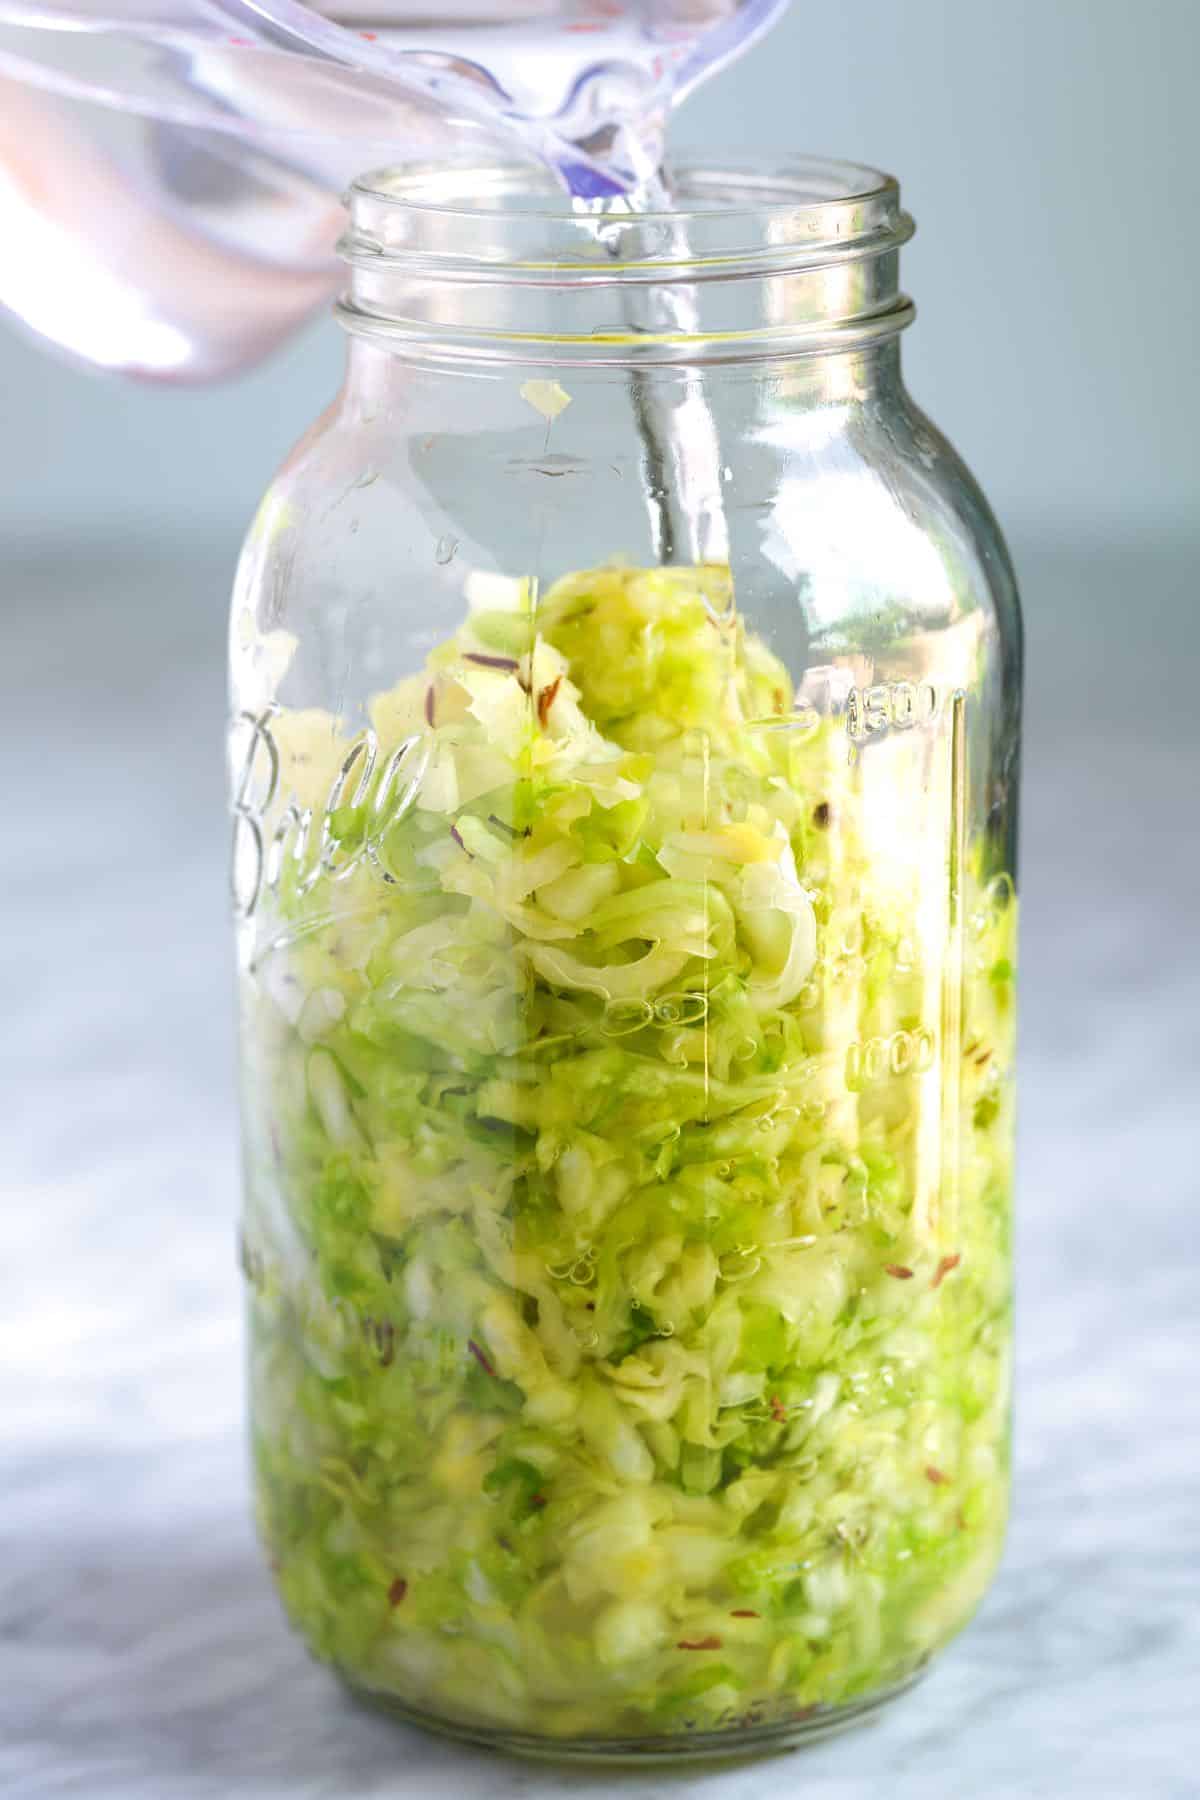 Pouring a 2% salt brine into a jar with cabbage for fermented sauerkraut